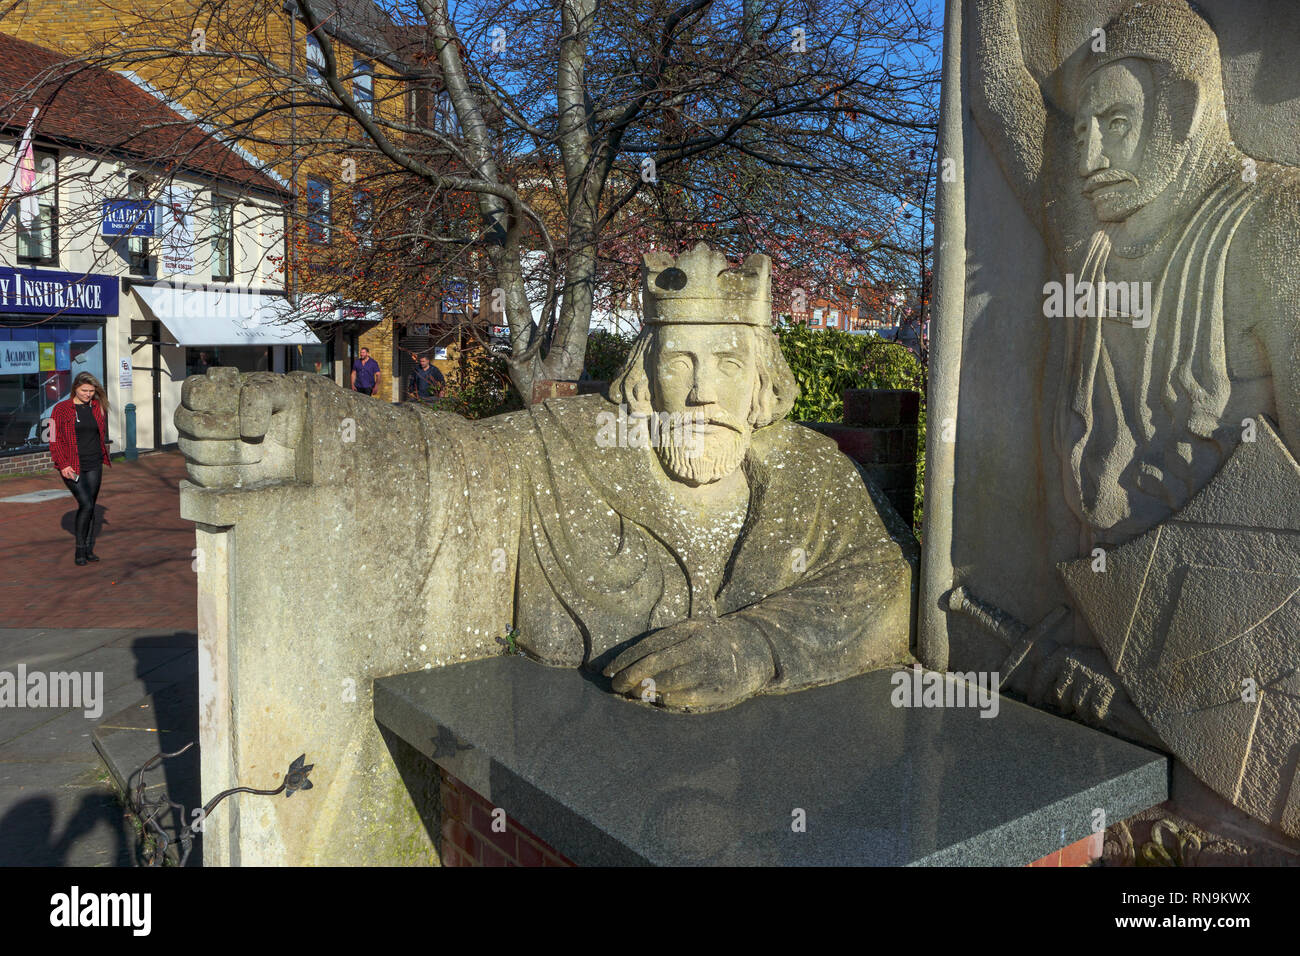 King John on a sculpture by David Parfitt, Egham, a town in Runnymede, Surrey, south-east England, UK where the Magna Carta was signed Stock Photo